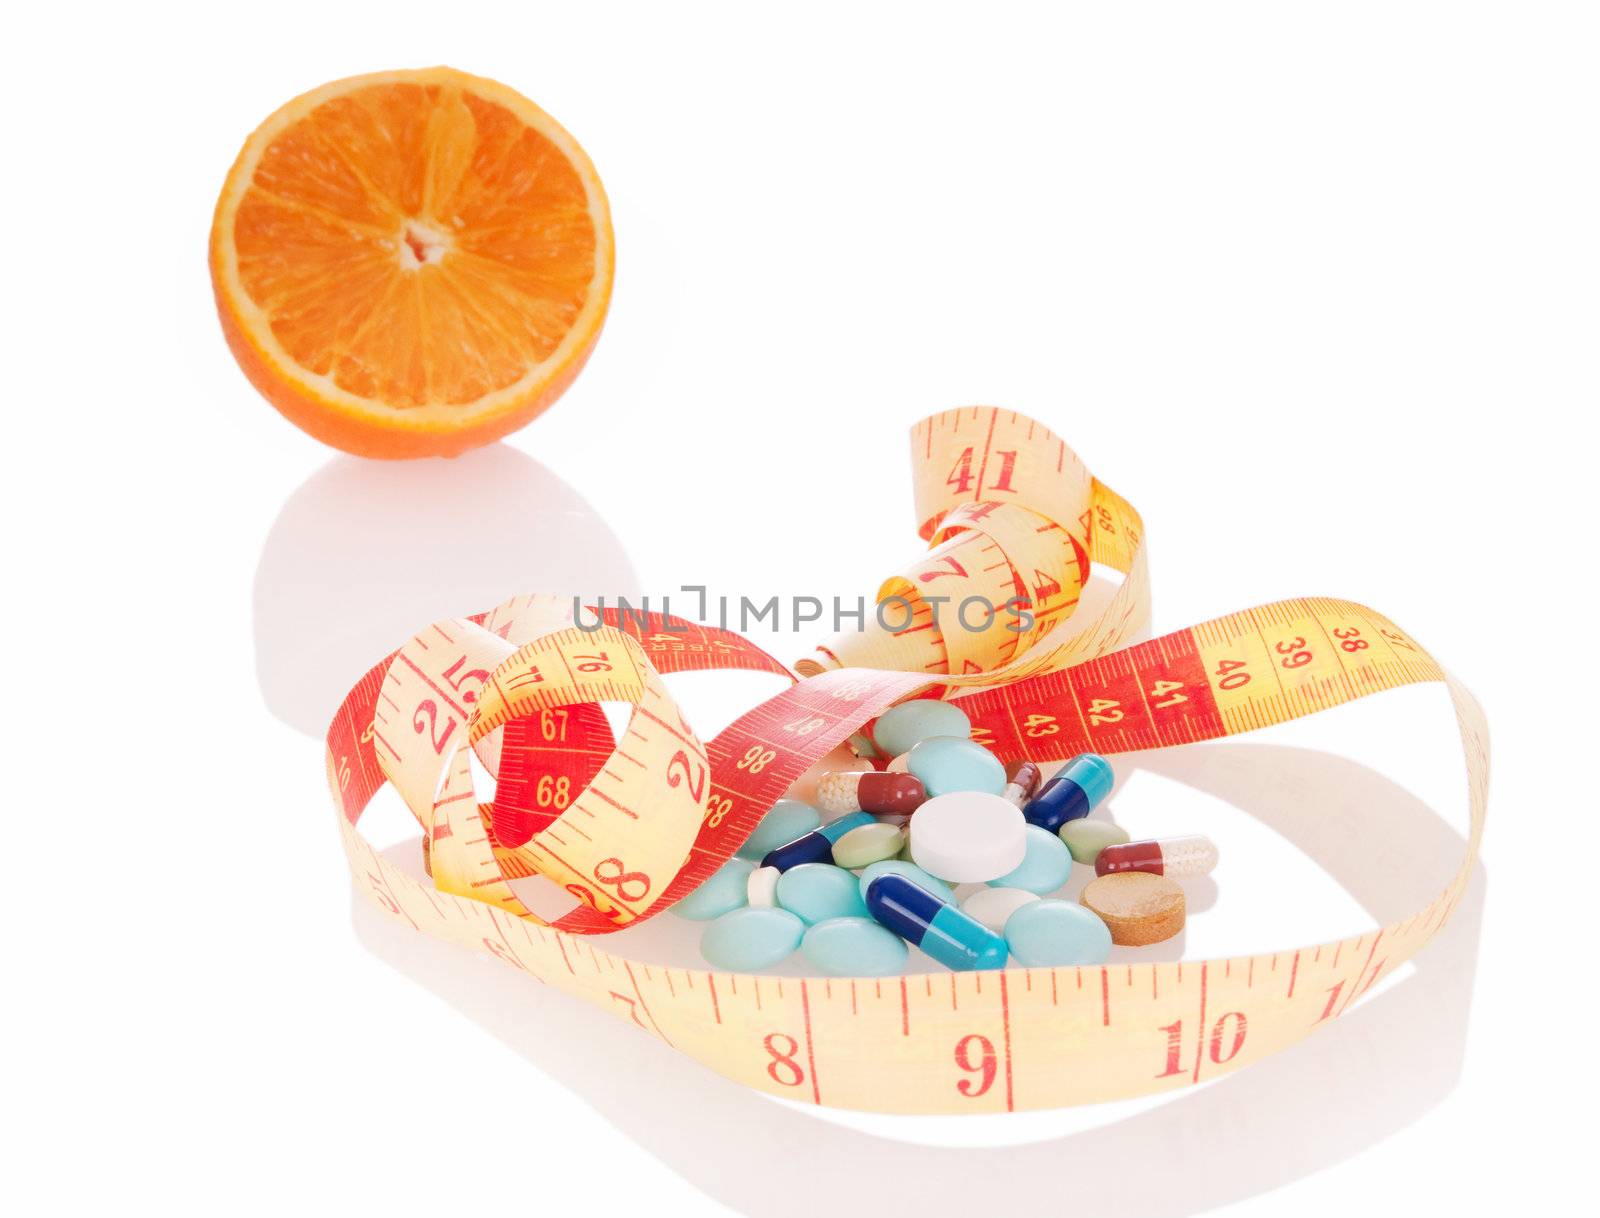 Concept of diet and medicine.  Heap of pills, orange slice and measuring tape with reflection on white background. Focus on pills